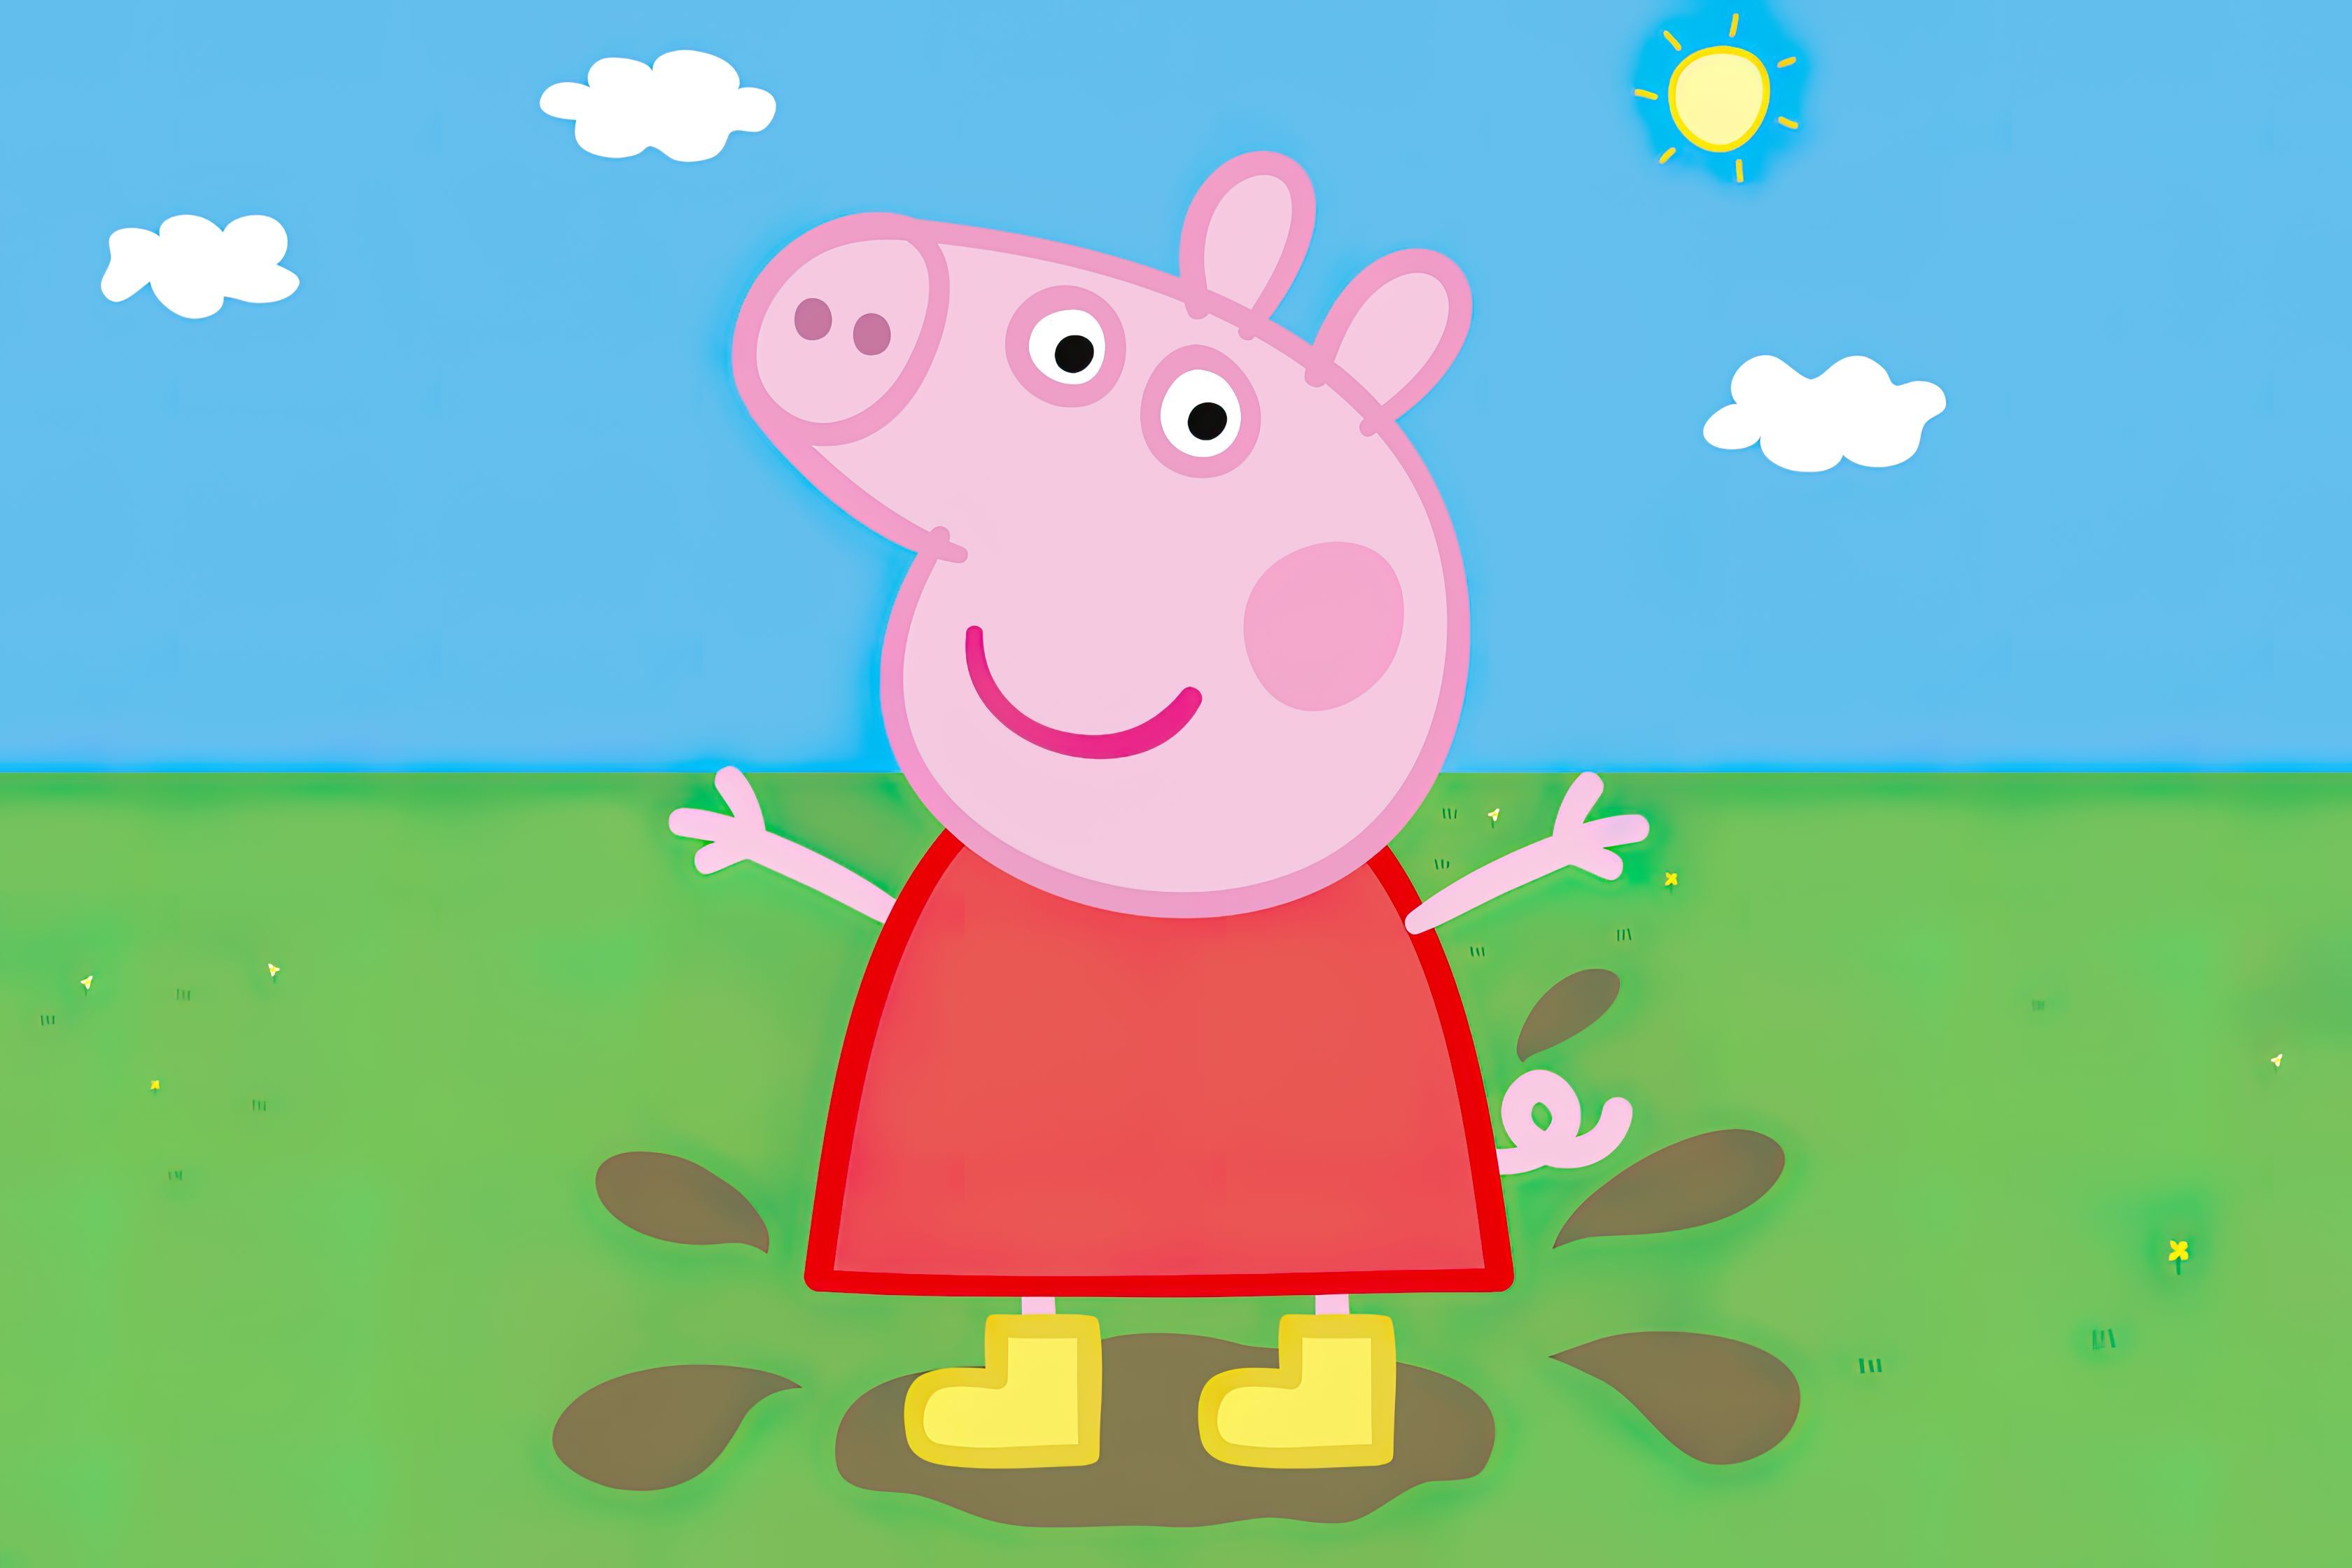 Download Peppa Pig wallpaper for mobile phone, free Peppa Pig HD picture